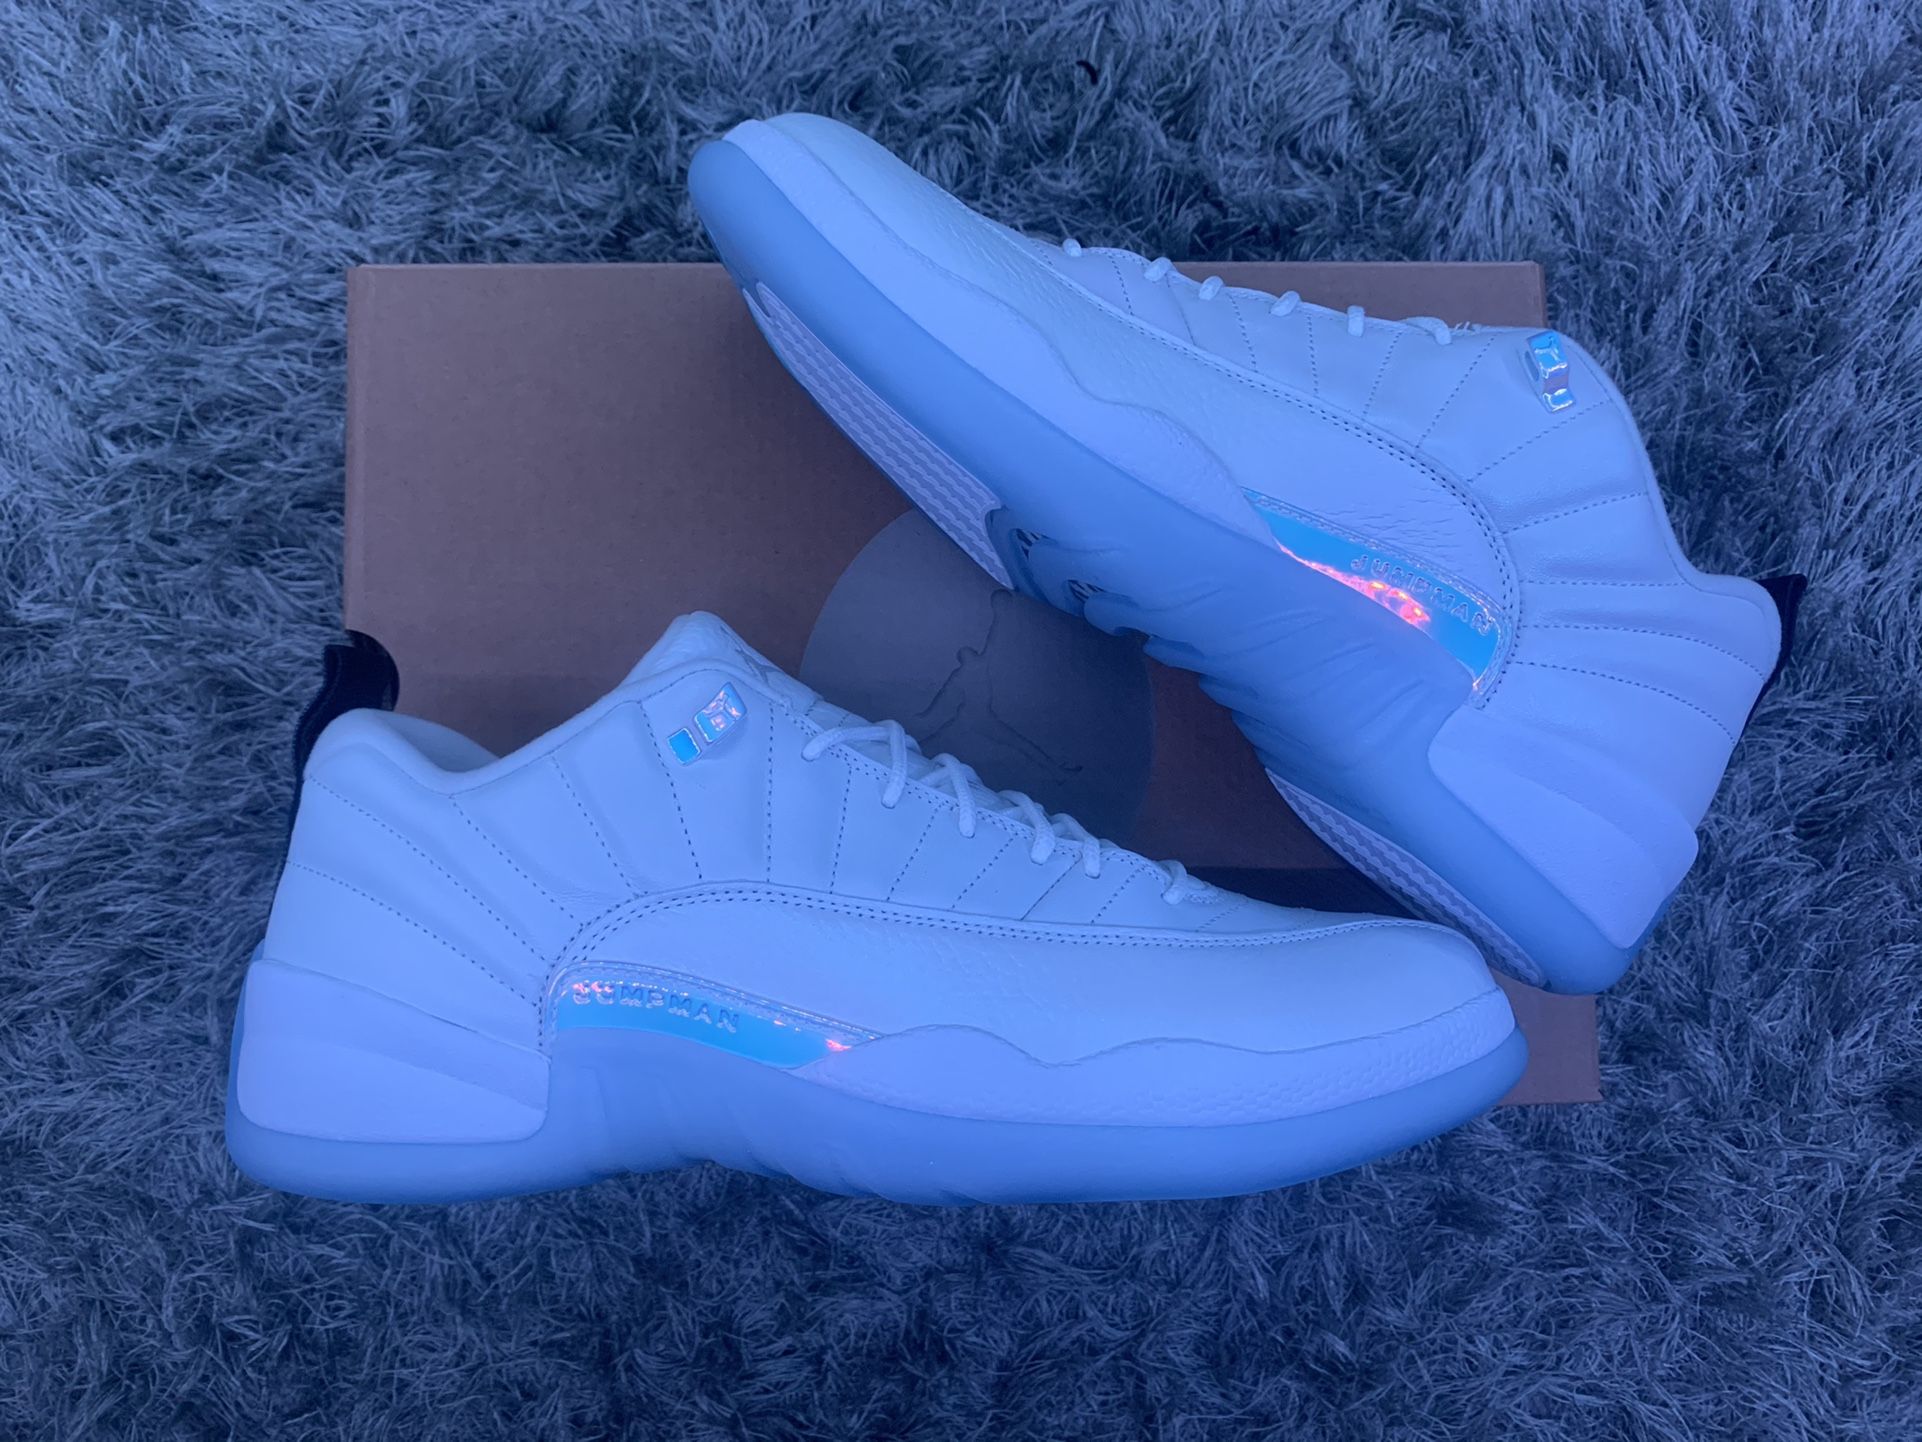 Jordan 12 Retro Low High Easter 2021 Size:11.5 DS Brand New